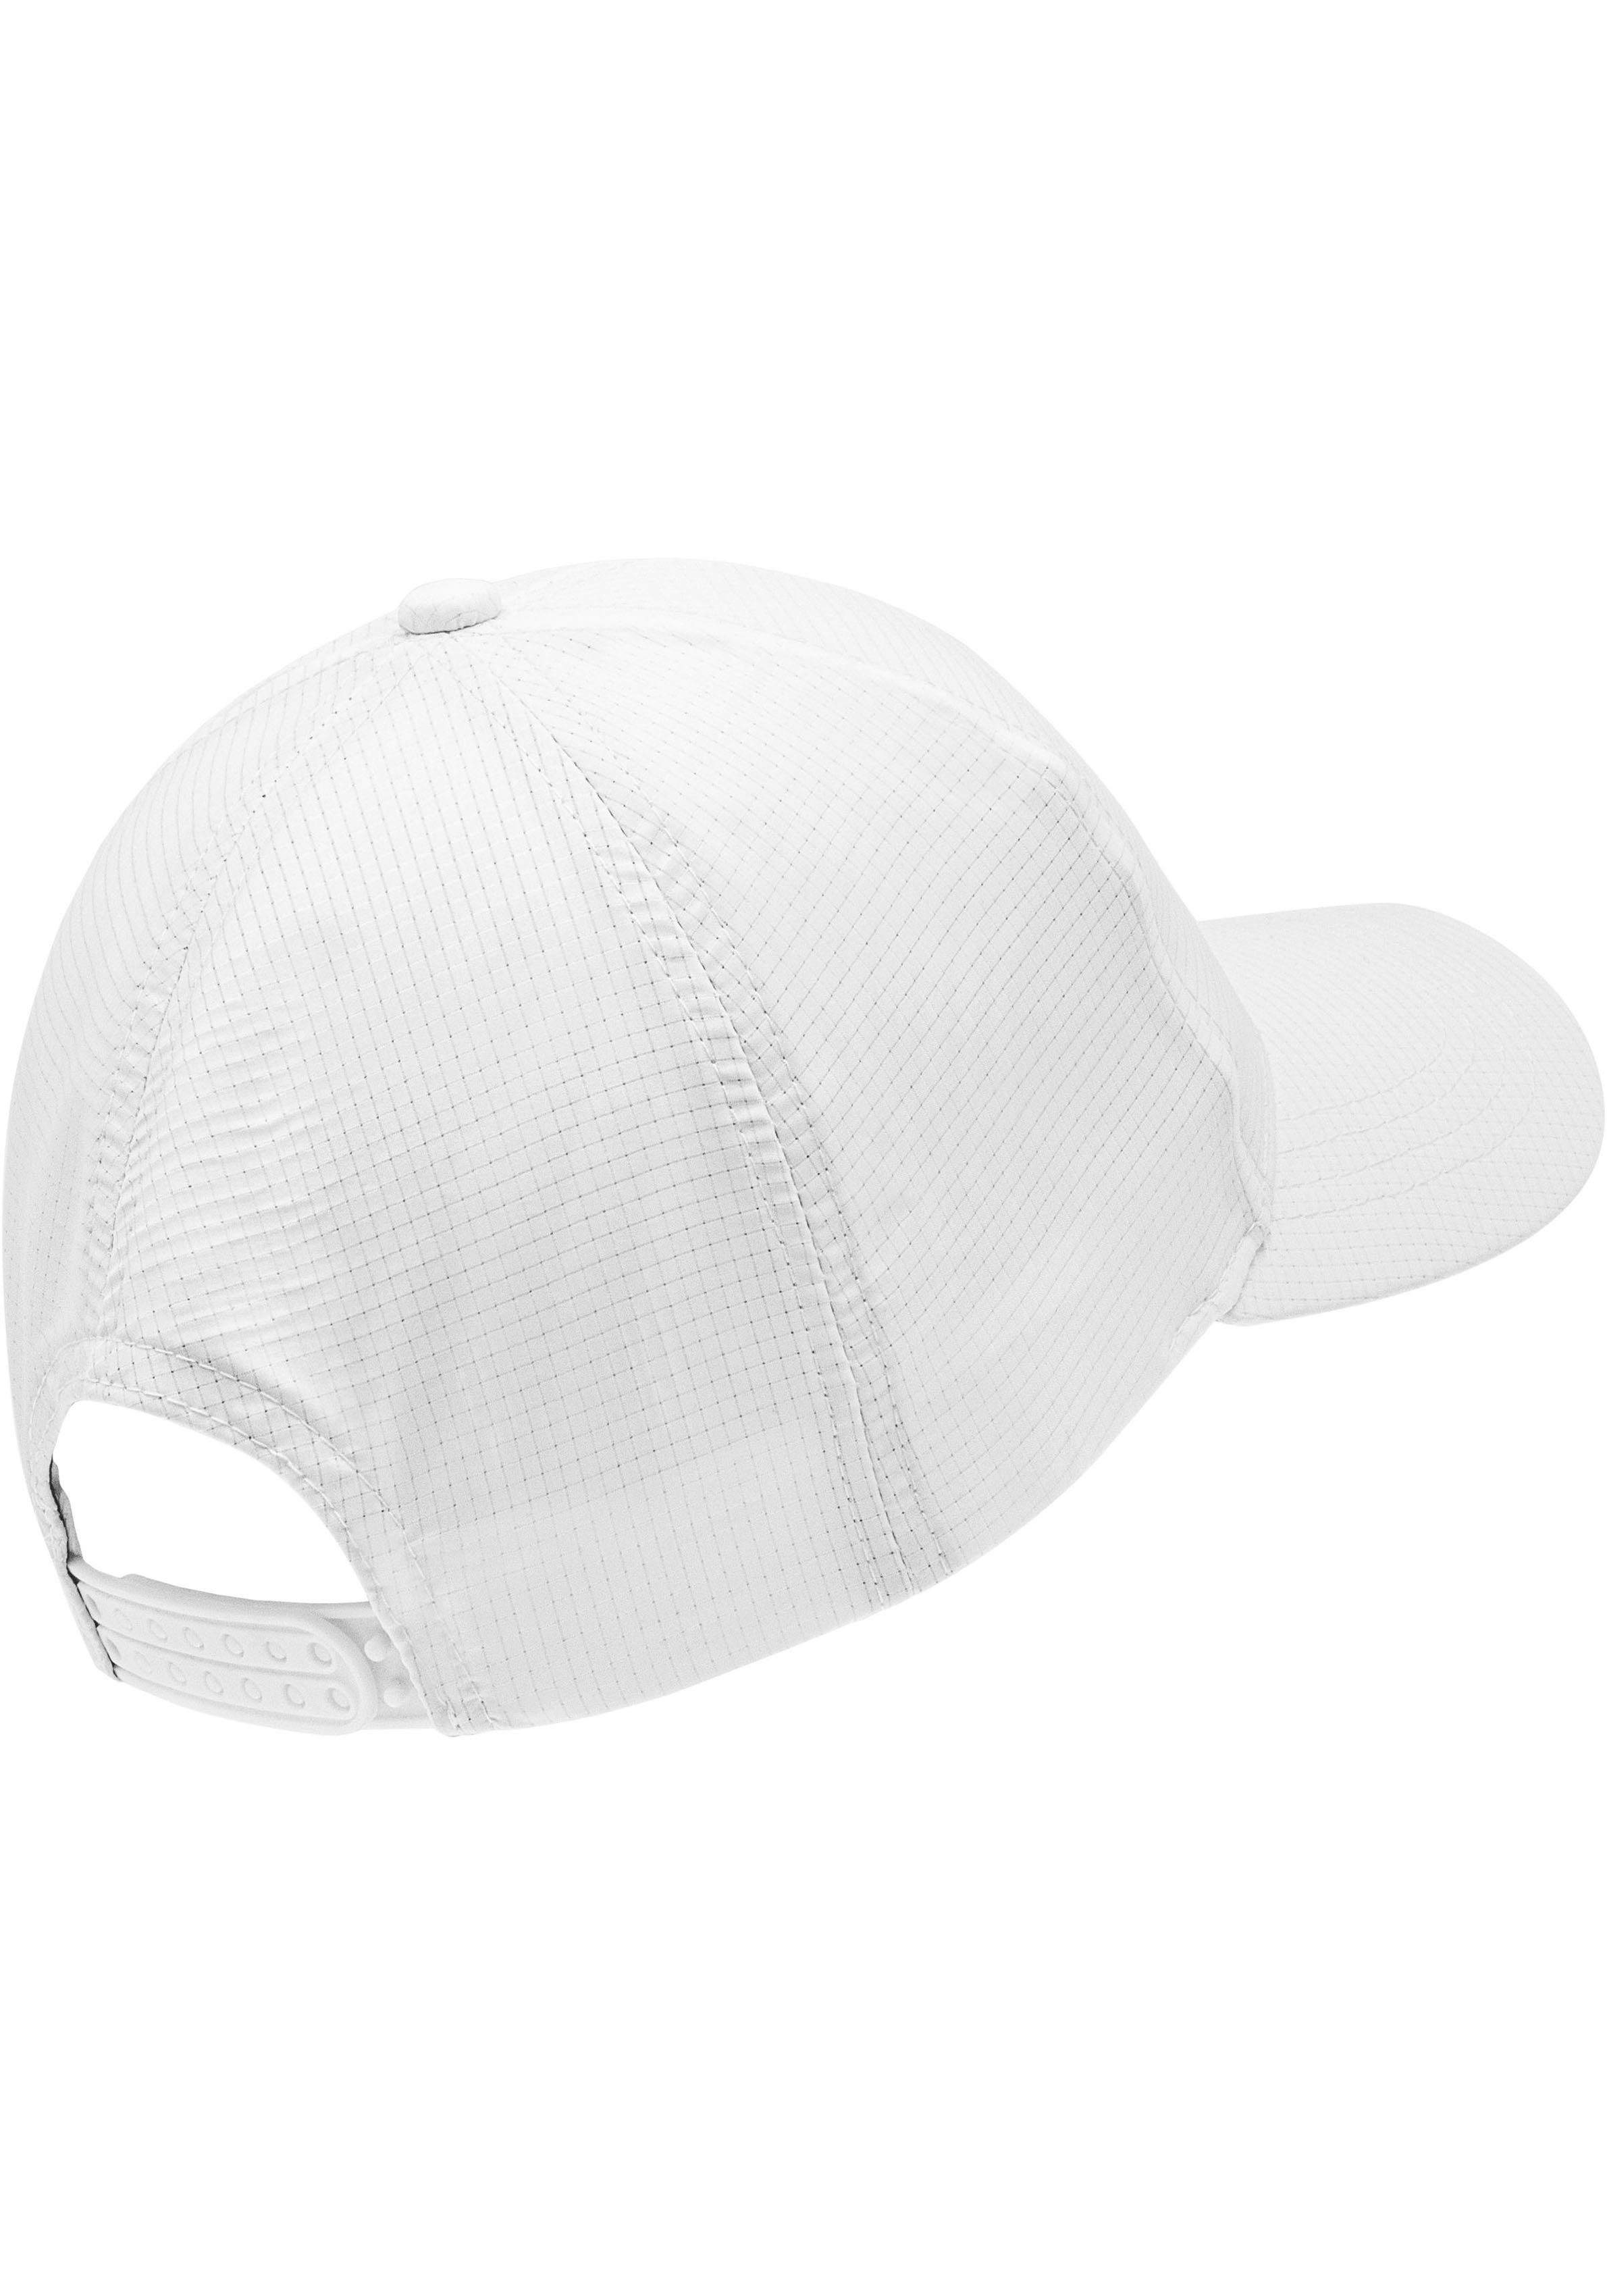 chillouts Baseball Cap Langley weiß Hat